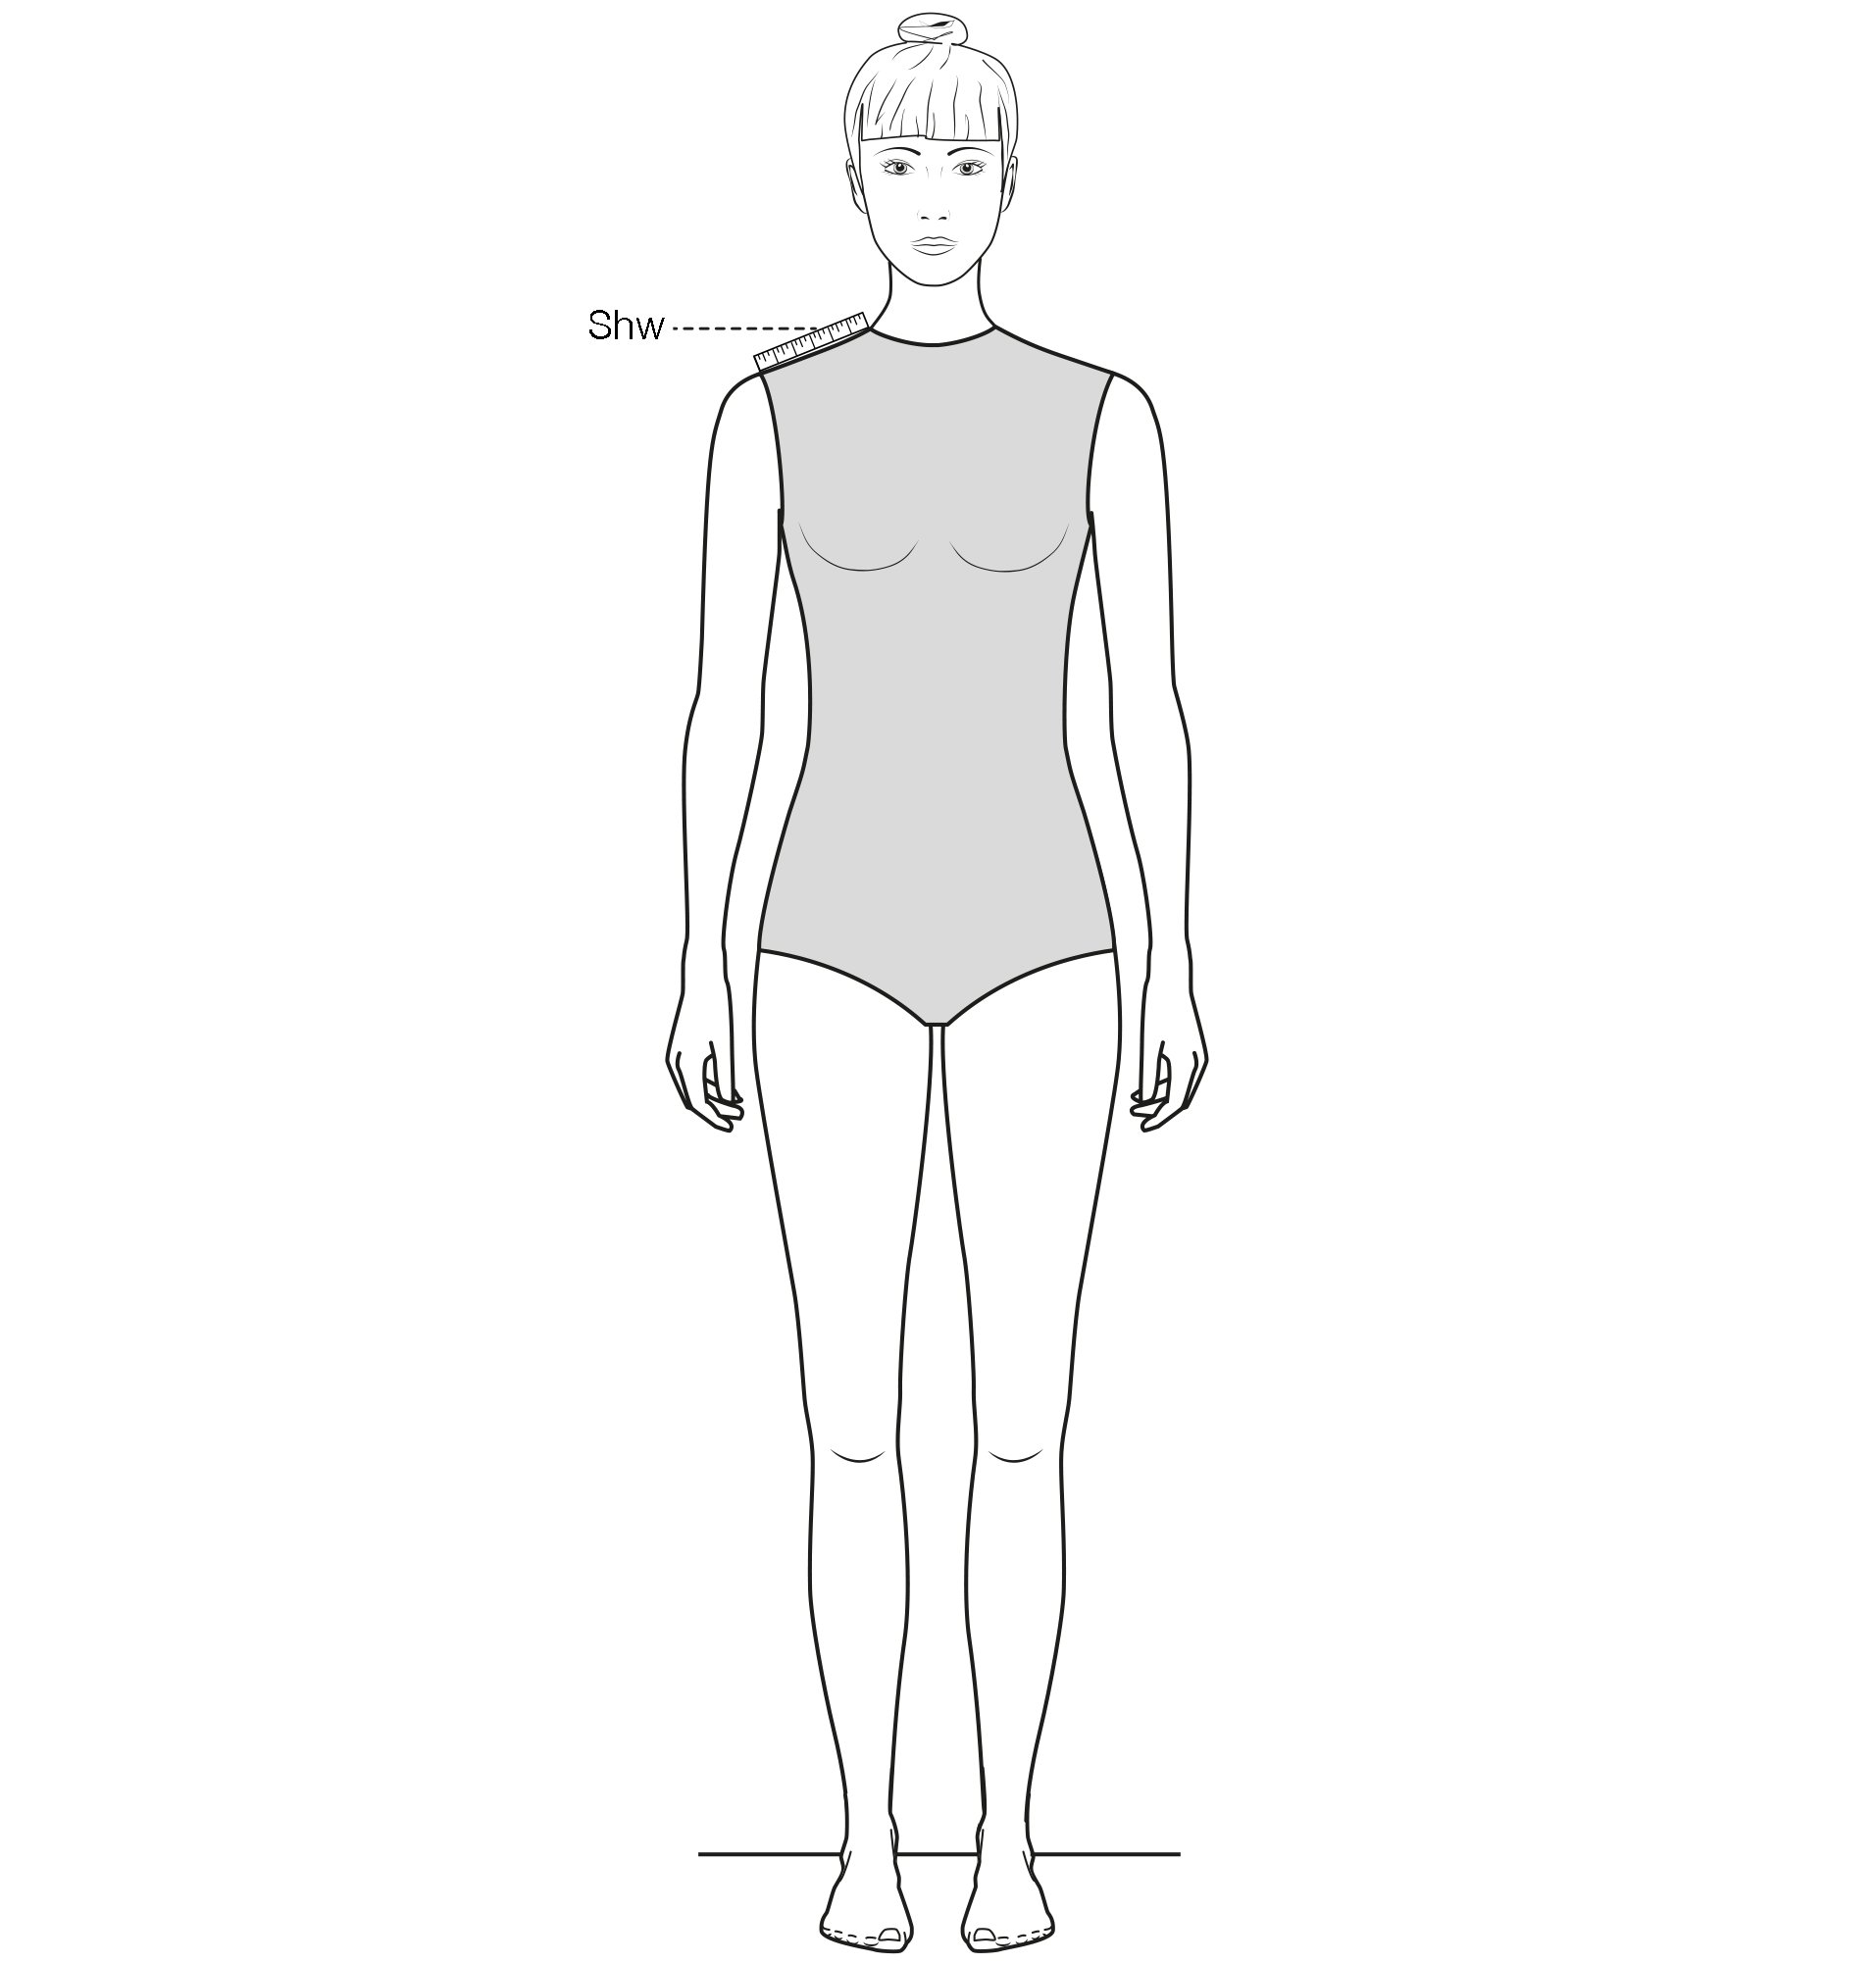 This figure shows the measurement of the Shoulder width